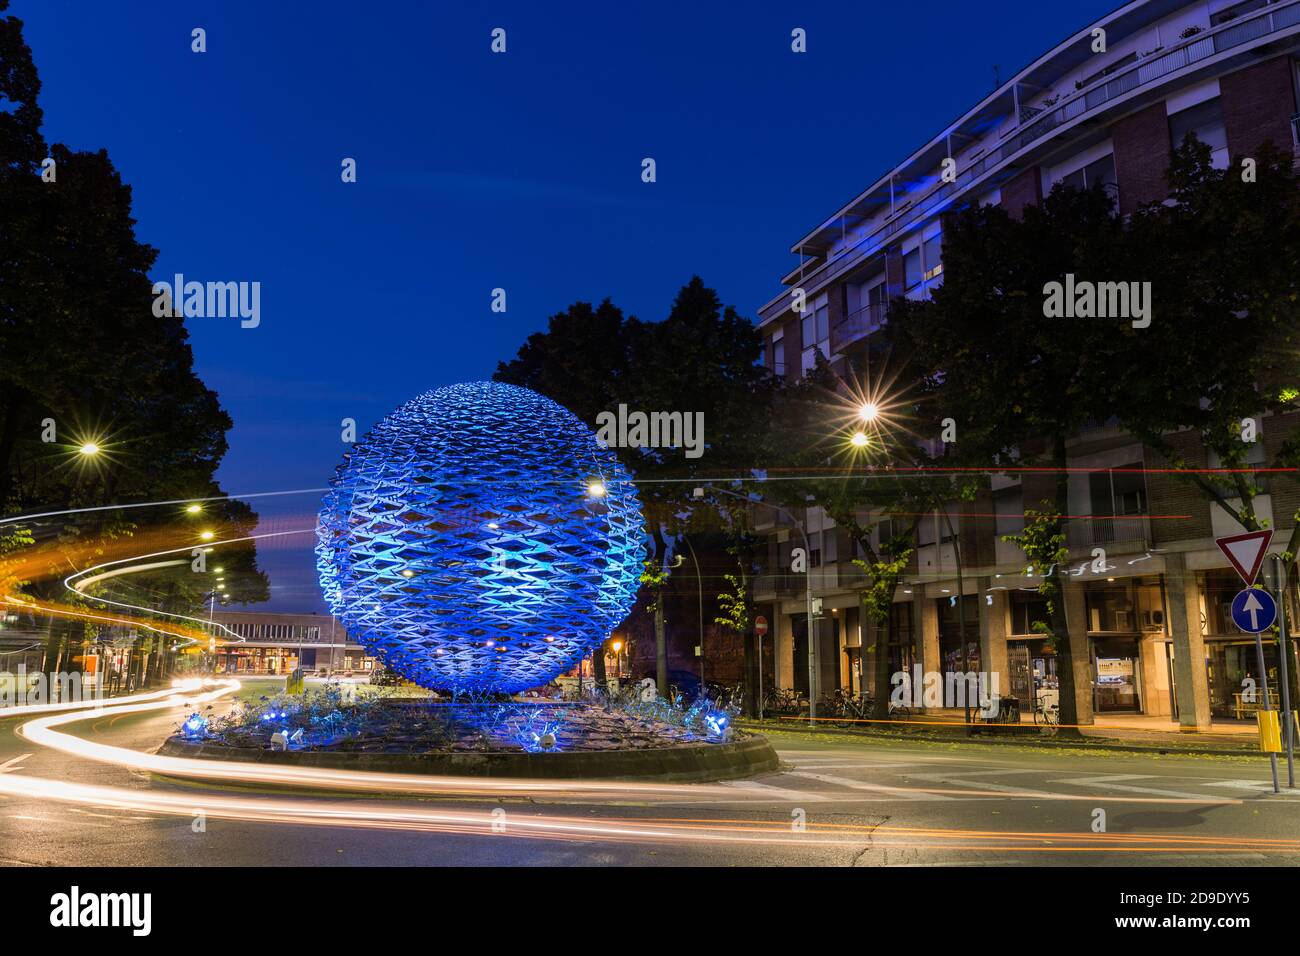 Large decorative illuminated in blue ball on a road with beautiful car lights at night. Treviso Italy Stock Photo